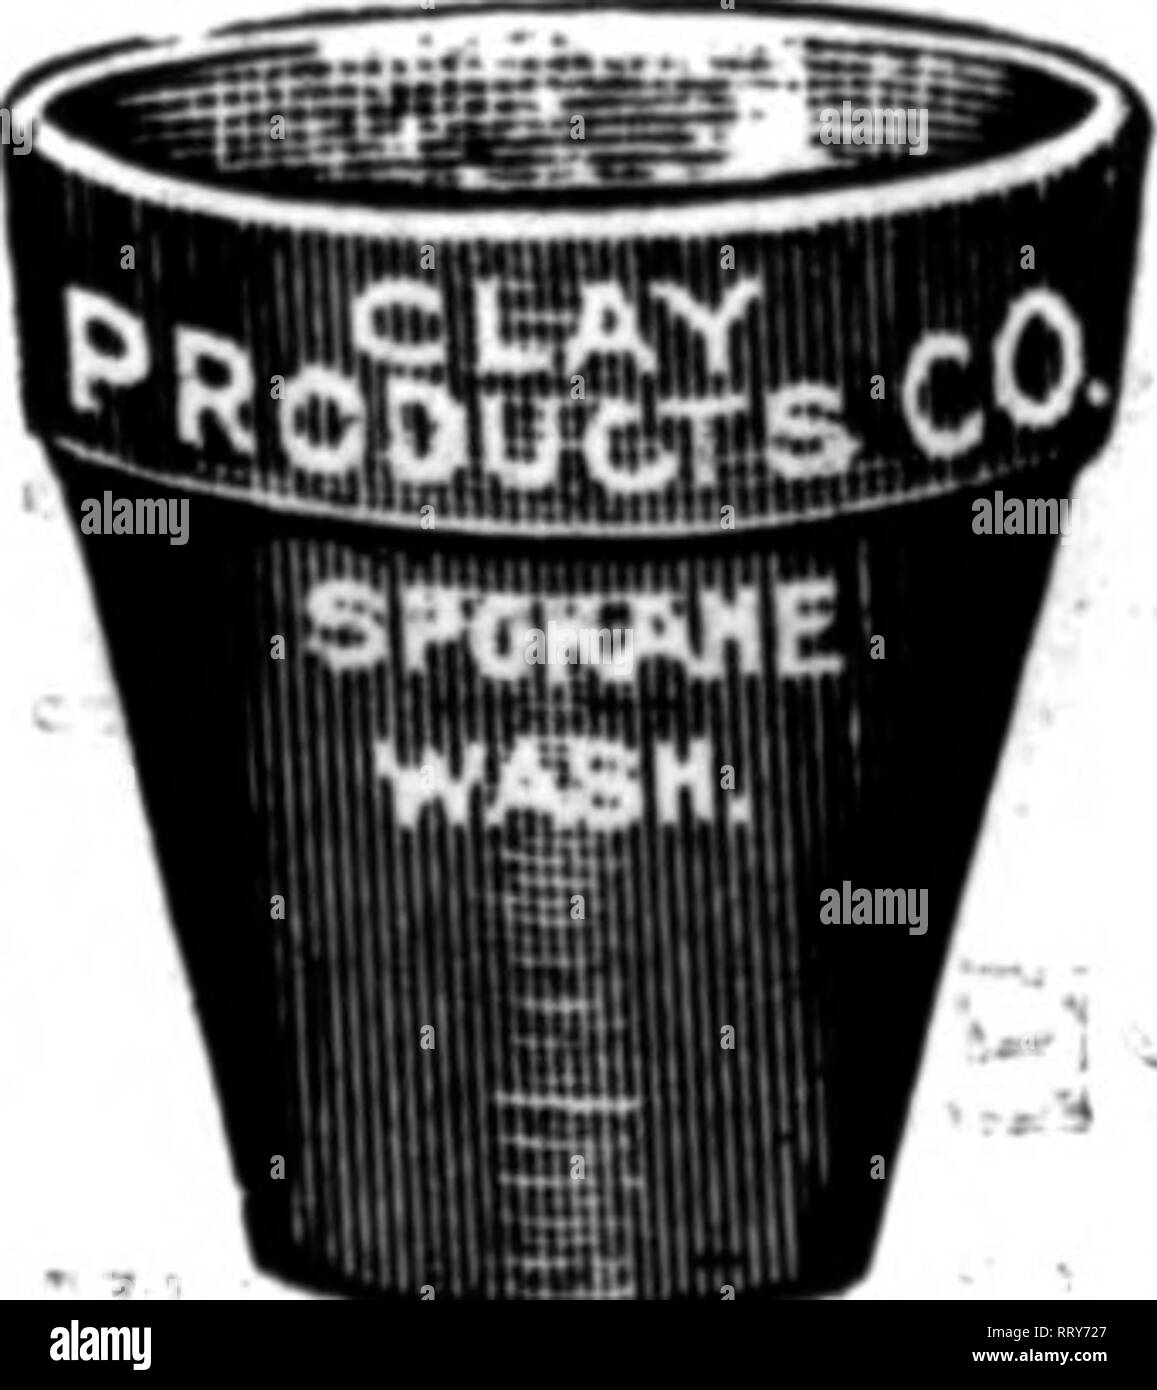 . Florists' review [microform]. Floriculture. Mention The Review when you write&gt; LARGEST FLOWER POT Manufacturers In the West. Complete stock of select red pots, pans, etc.. always on band. Write us for prices. CLAY PRODUCTS CO. Spokane, Wash. Mention The Review when you write.. PATTON WOODEN WARE GO. SKATTLK, WASH. Mentio:: The Review when vou write. 50,000 One-Tear-Olcl Perennial Plants, $1.50 to $3.50 per 100, accordlntr to variety. 18,000 Pinks, very nice plants, $2.50 per 100. 85 .QUO Pansles, good German strain, $2.00 per 100. 1000 Violets (Lady Campbell), In blossom, nice for bed- di Stock Photo